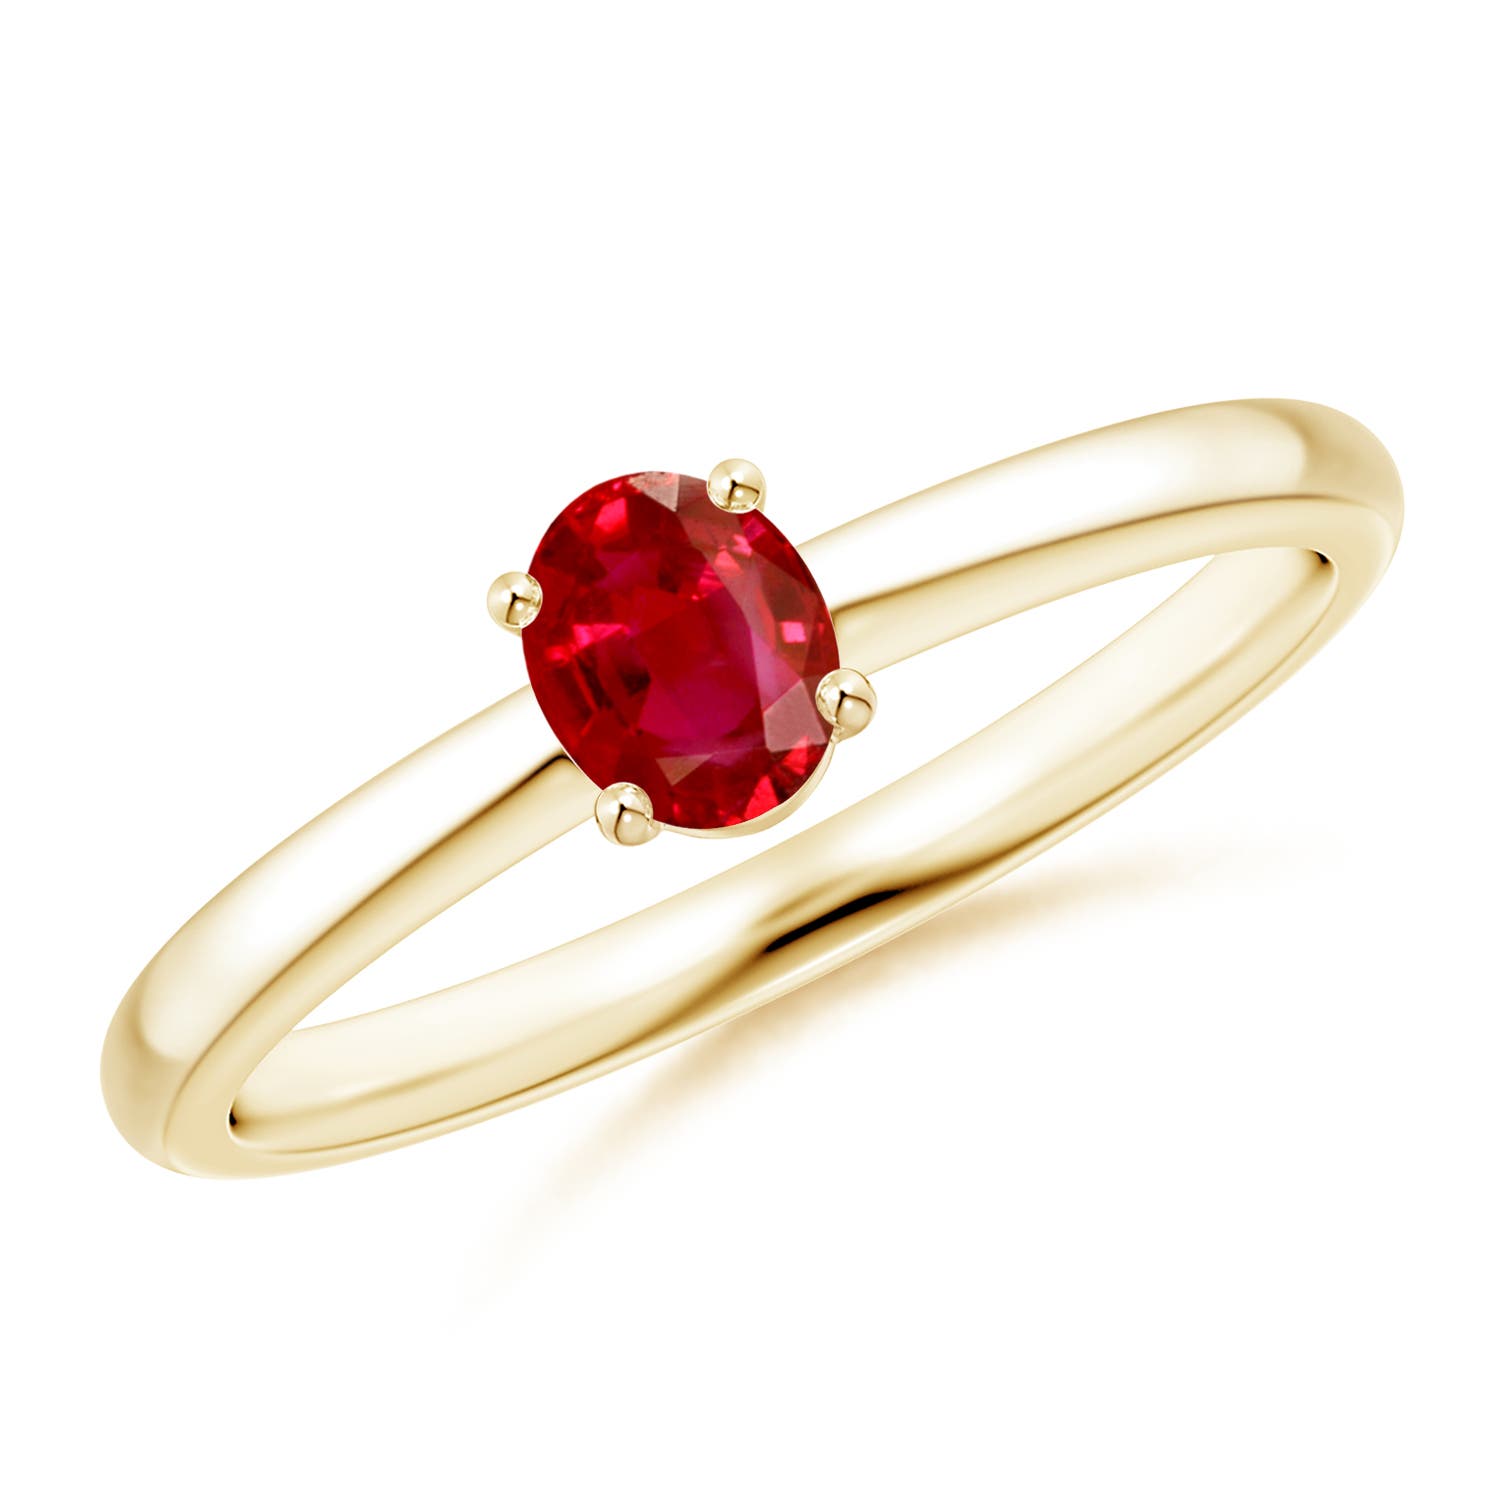 AAA - Ruby / 0.4 CT / 14 KT Yellow Gold